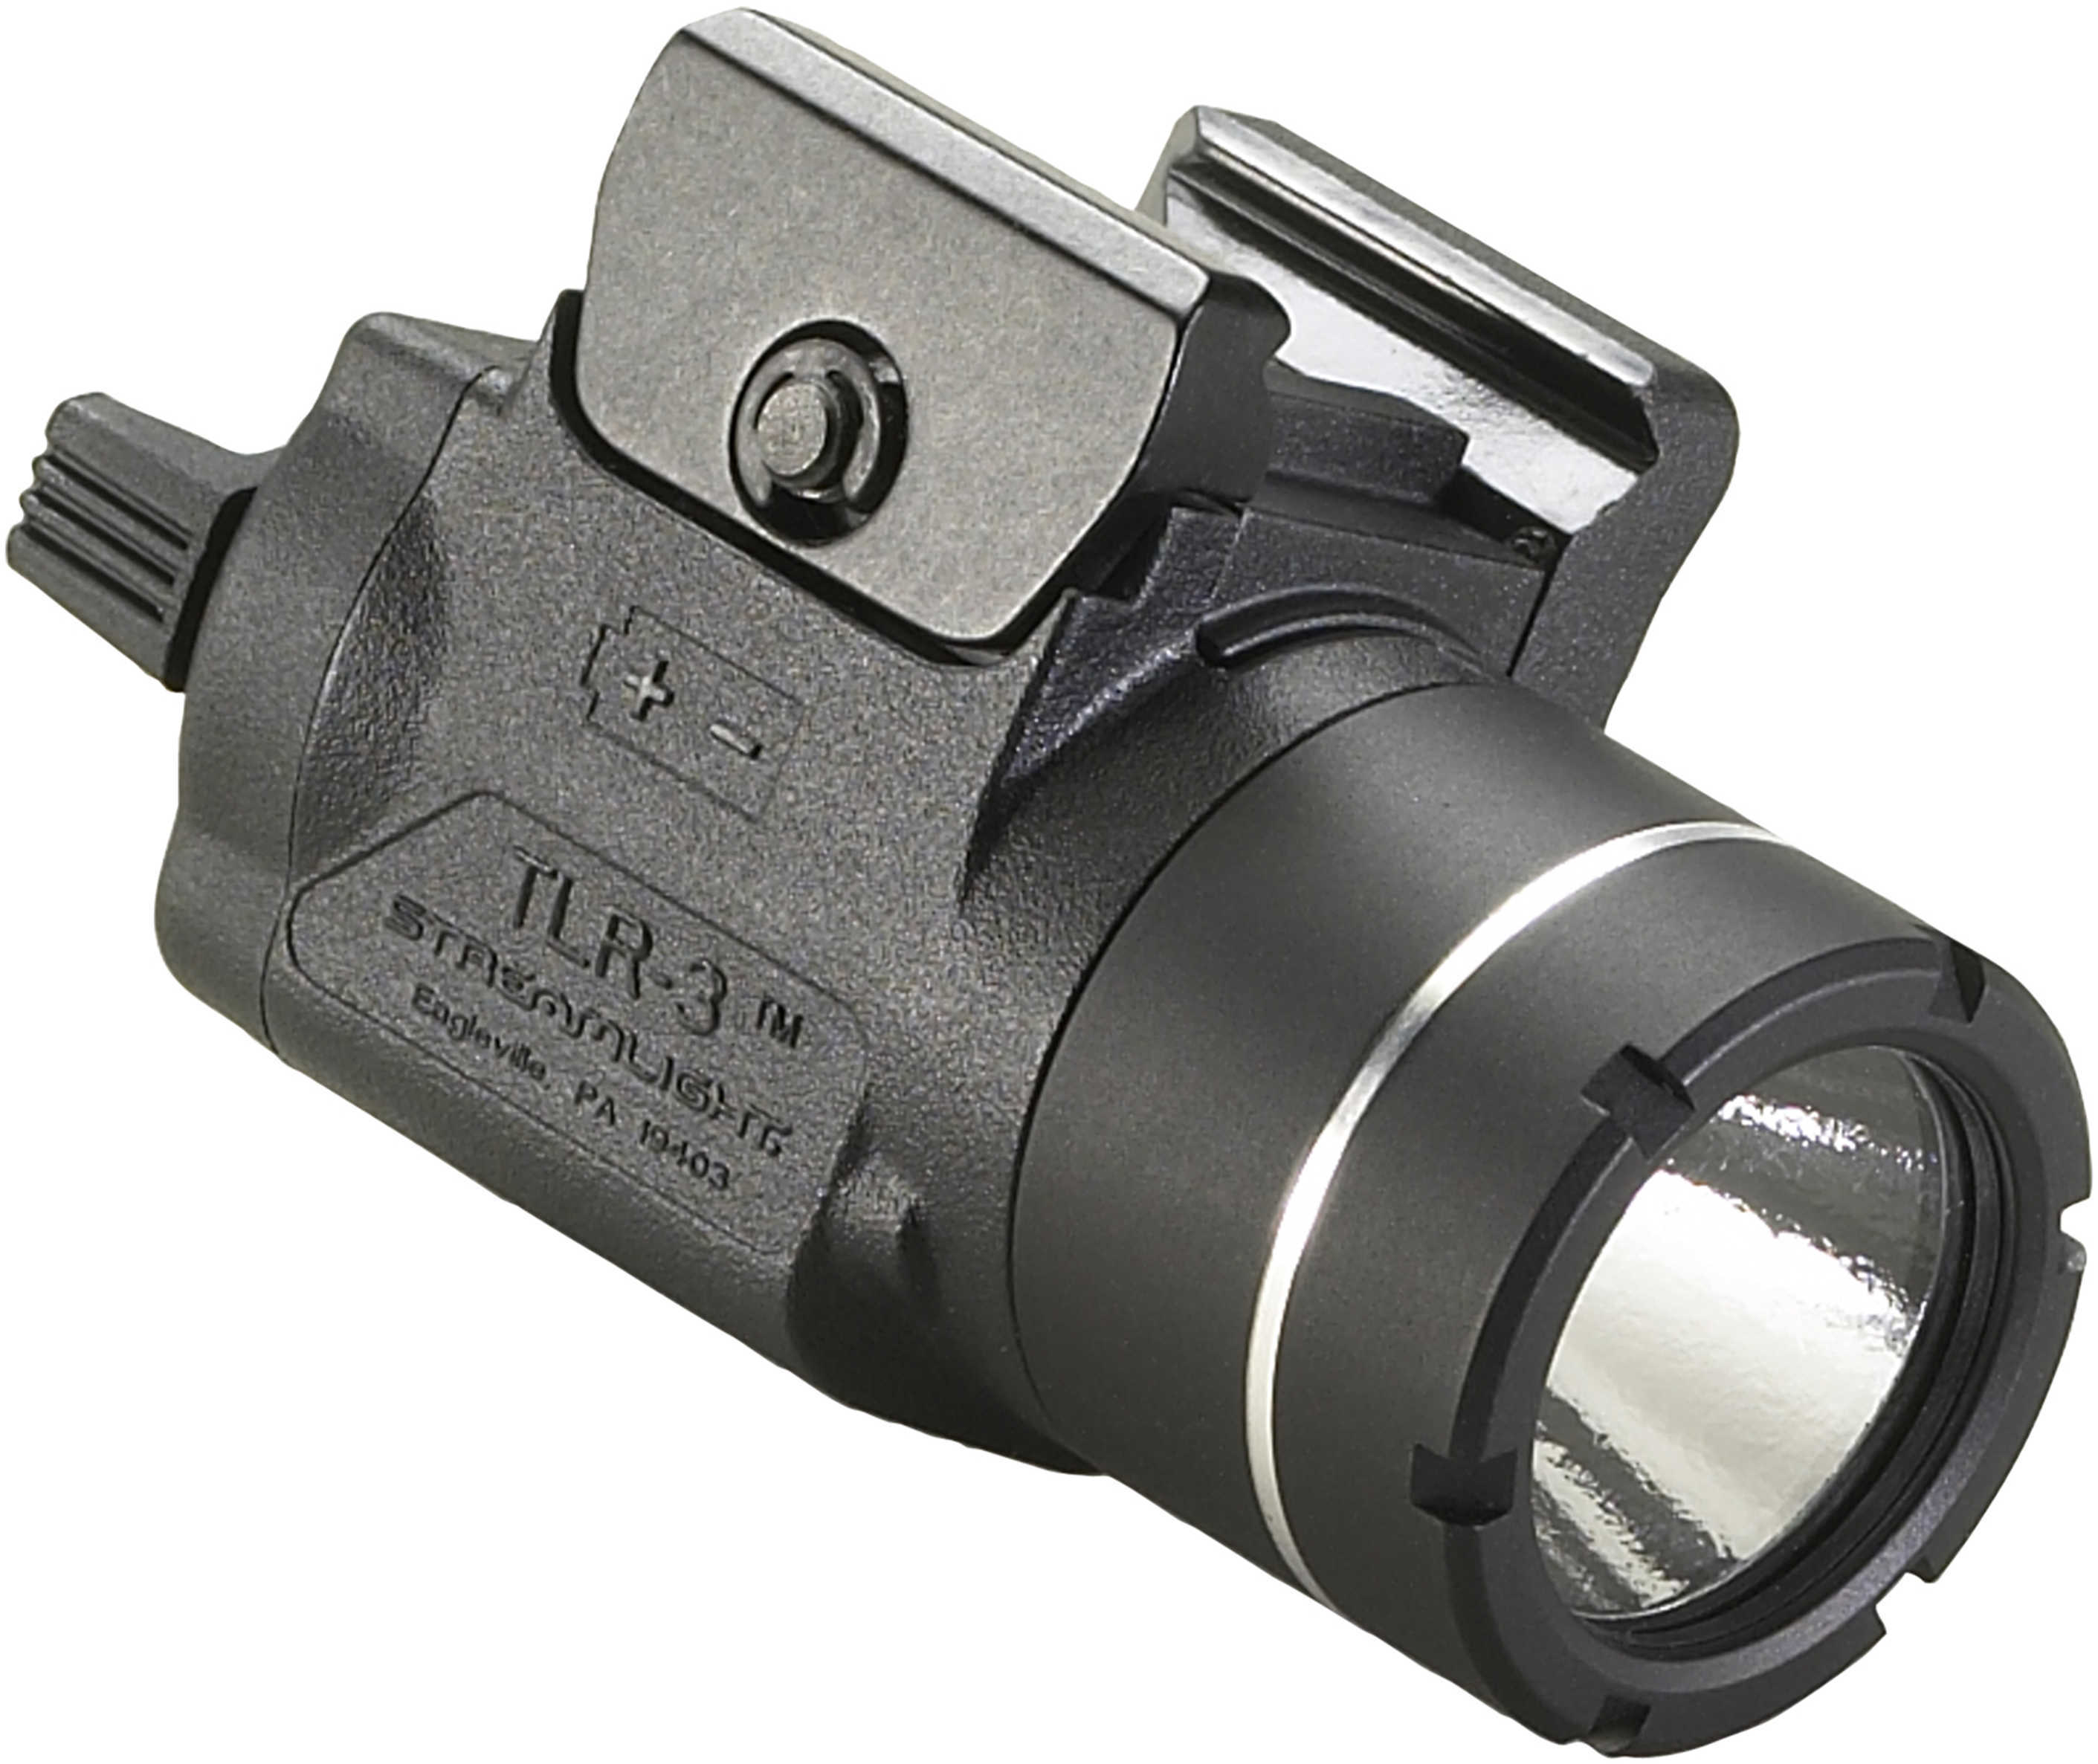 TLR-3 Compact Weapon Light